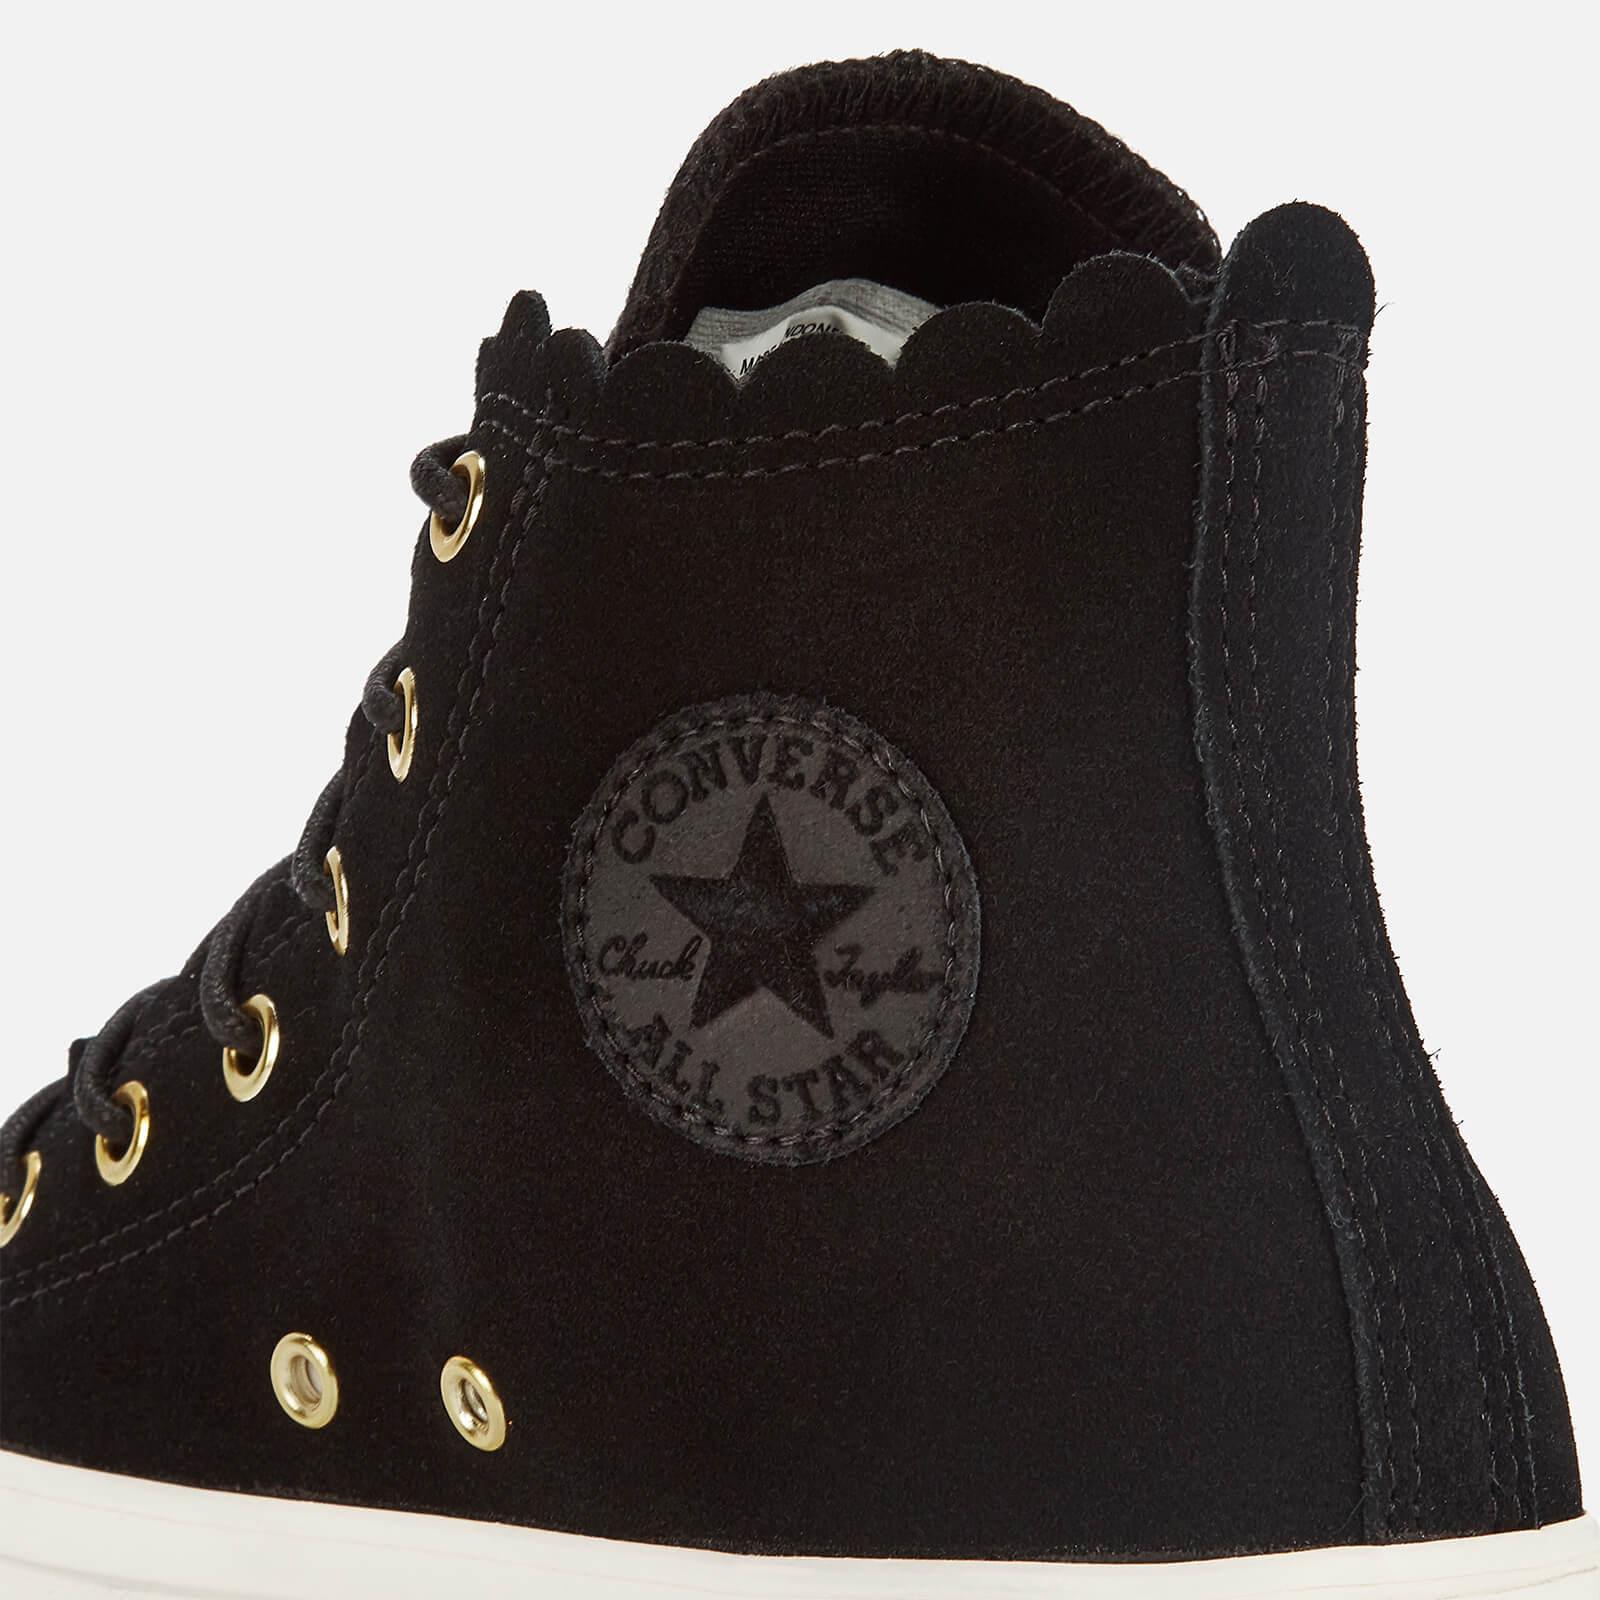 Converse Chuck Taylor All Star Scalloped Edge Hi-top Trainers in Black |  Lyst